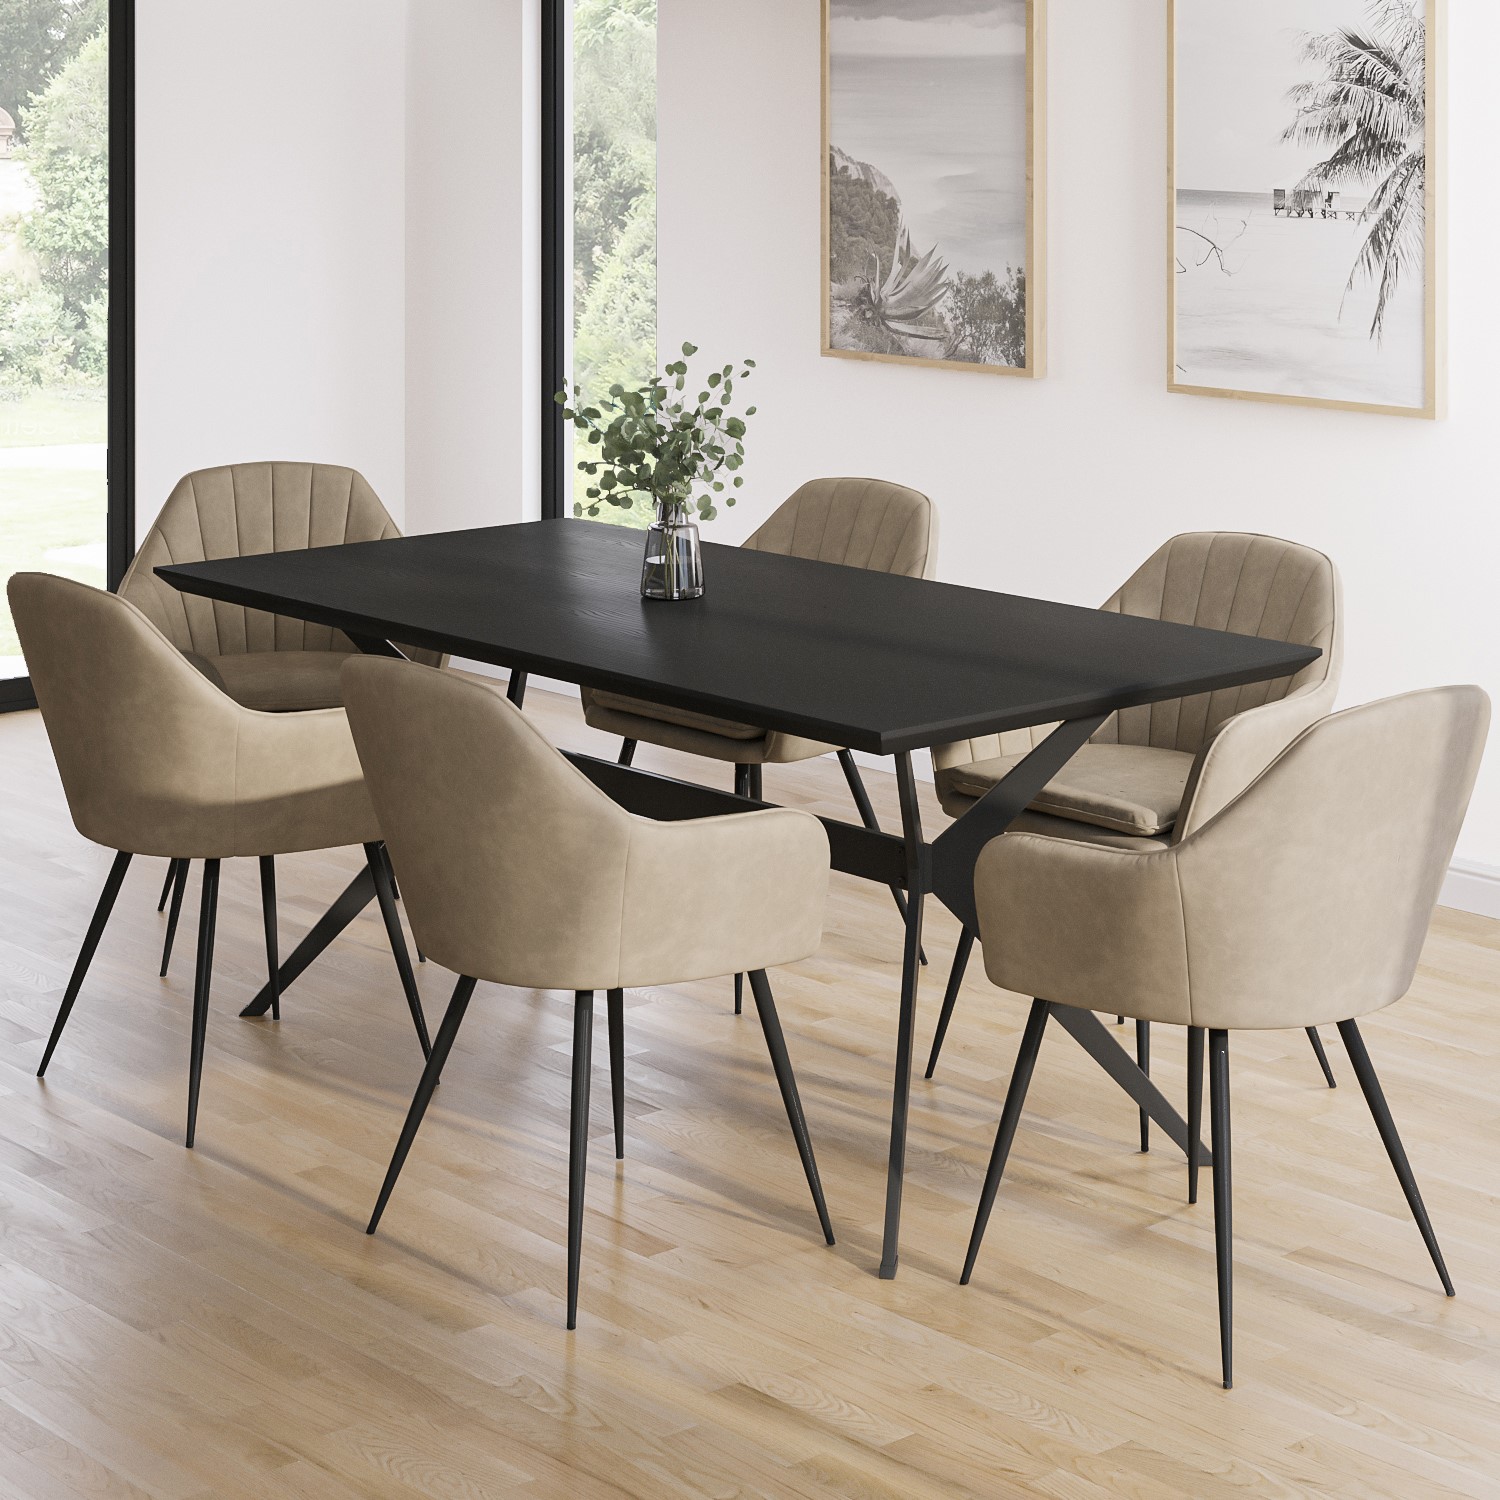 Photo of Black dining table with 6 beige faux leather dining chairs - rochelle